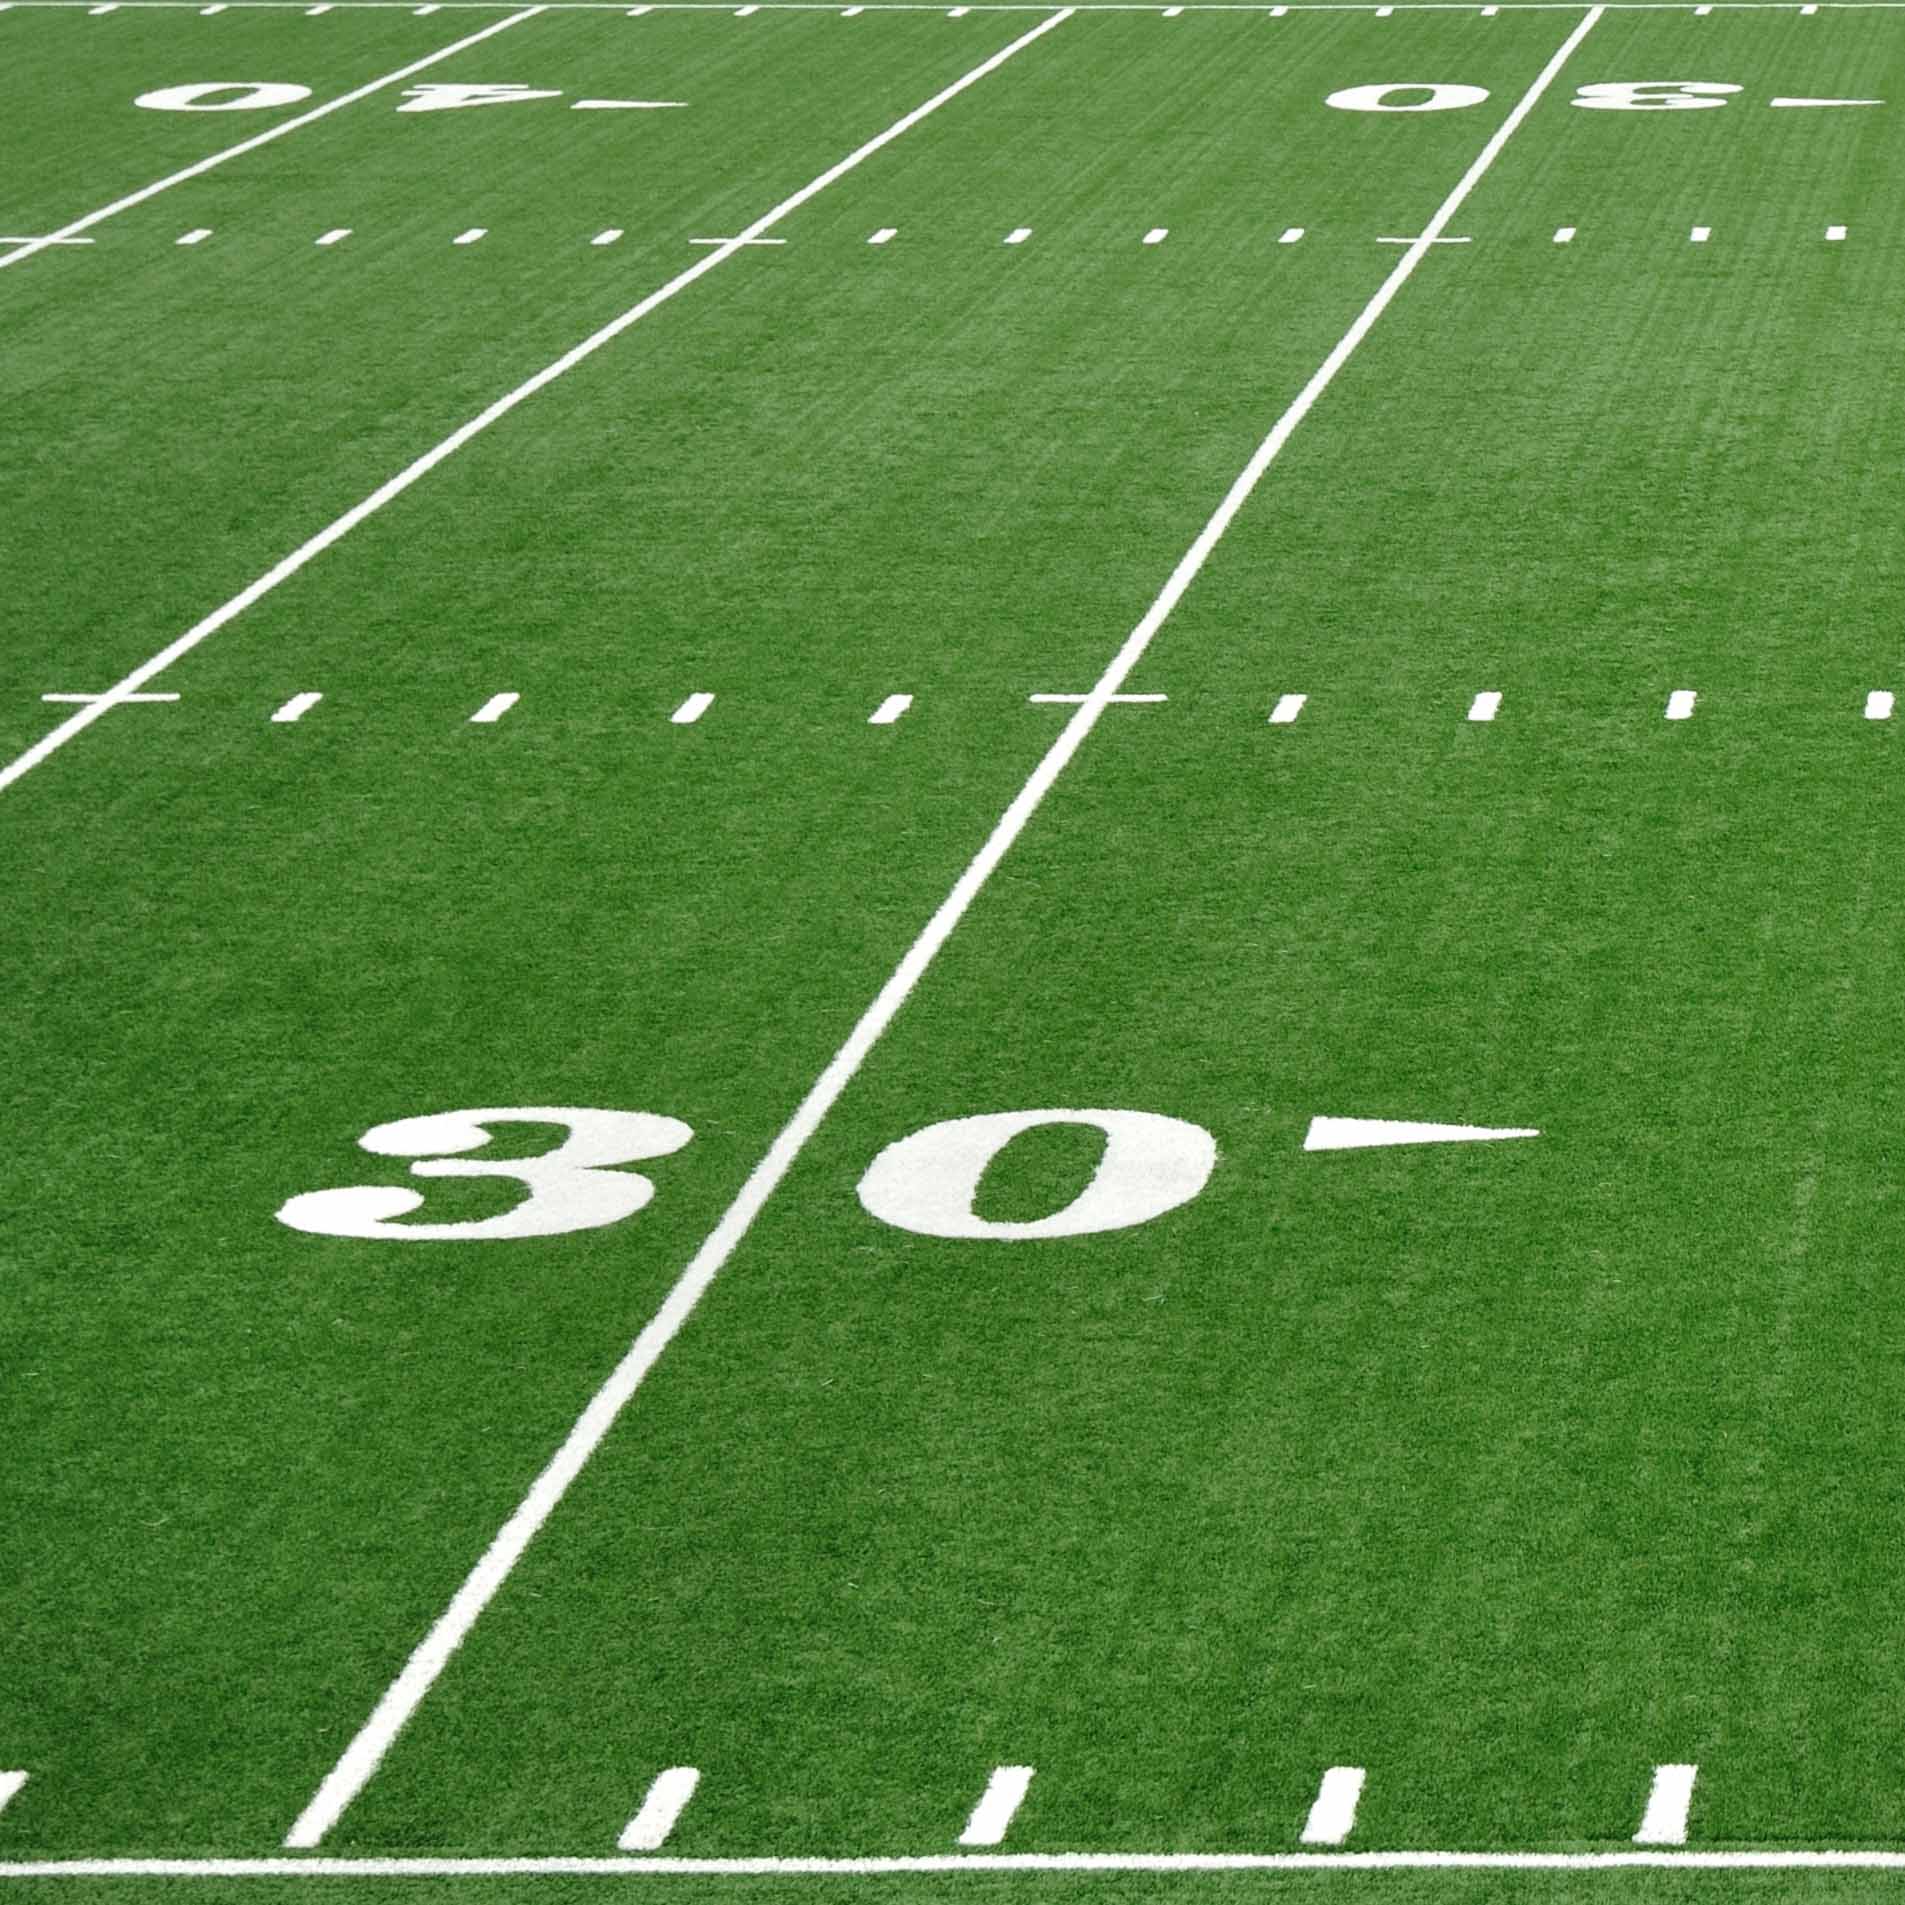 Football field at the 30 yard line